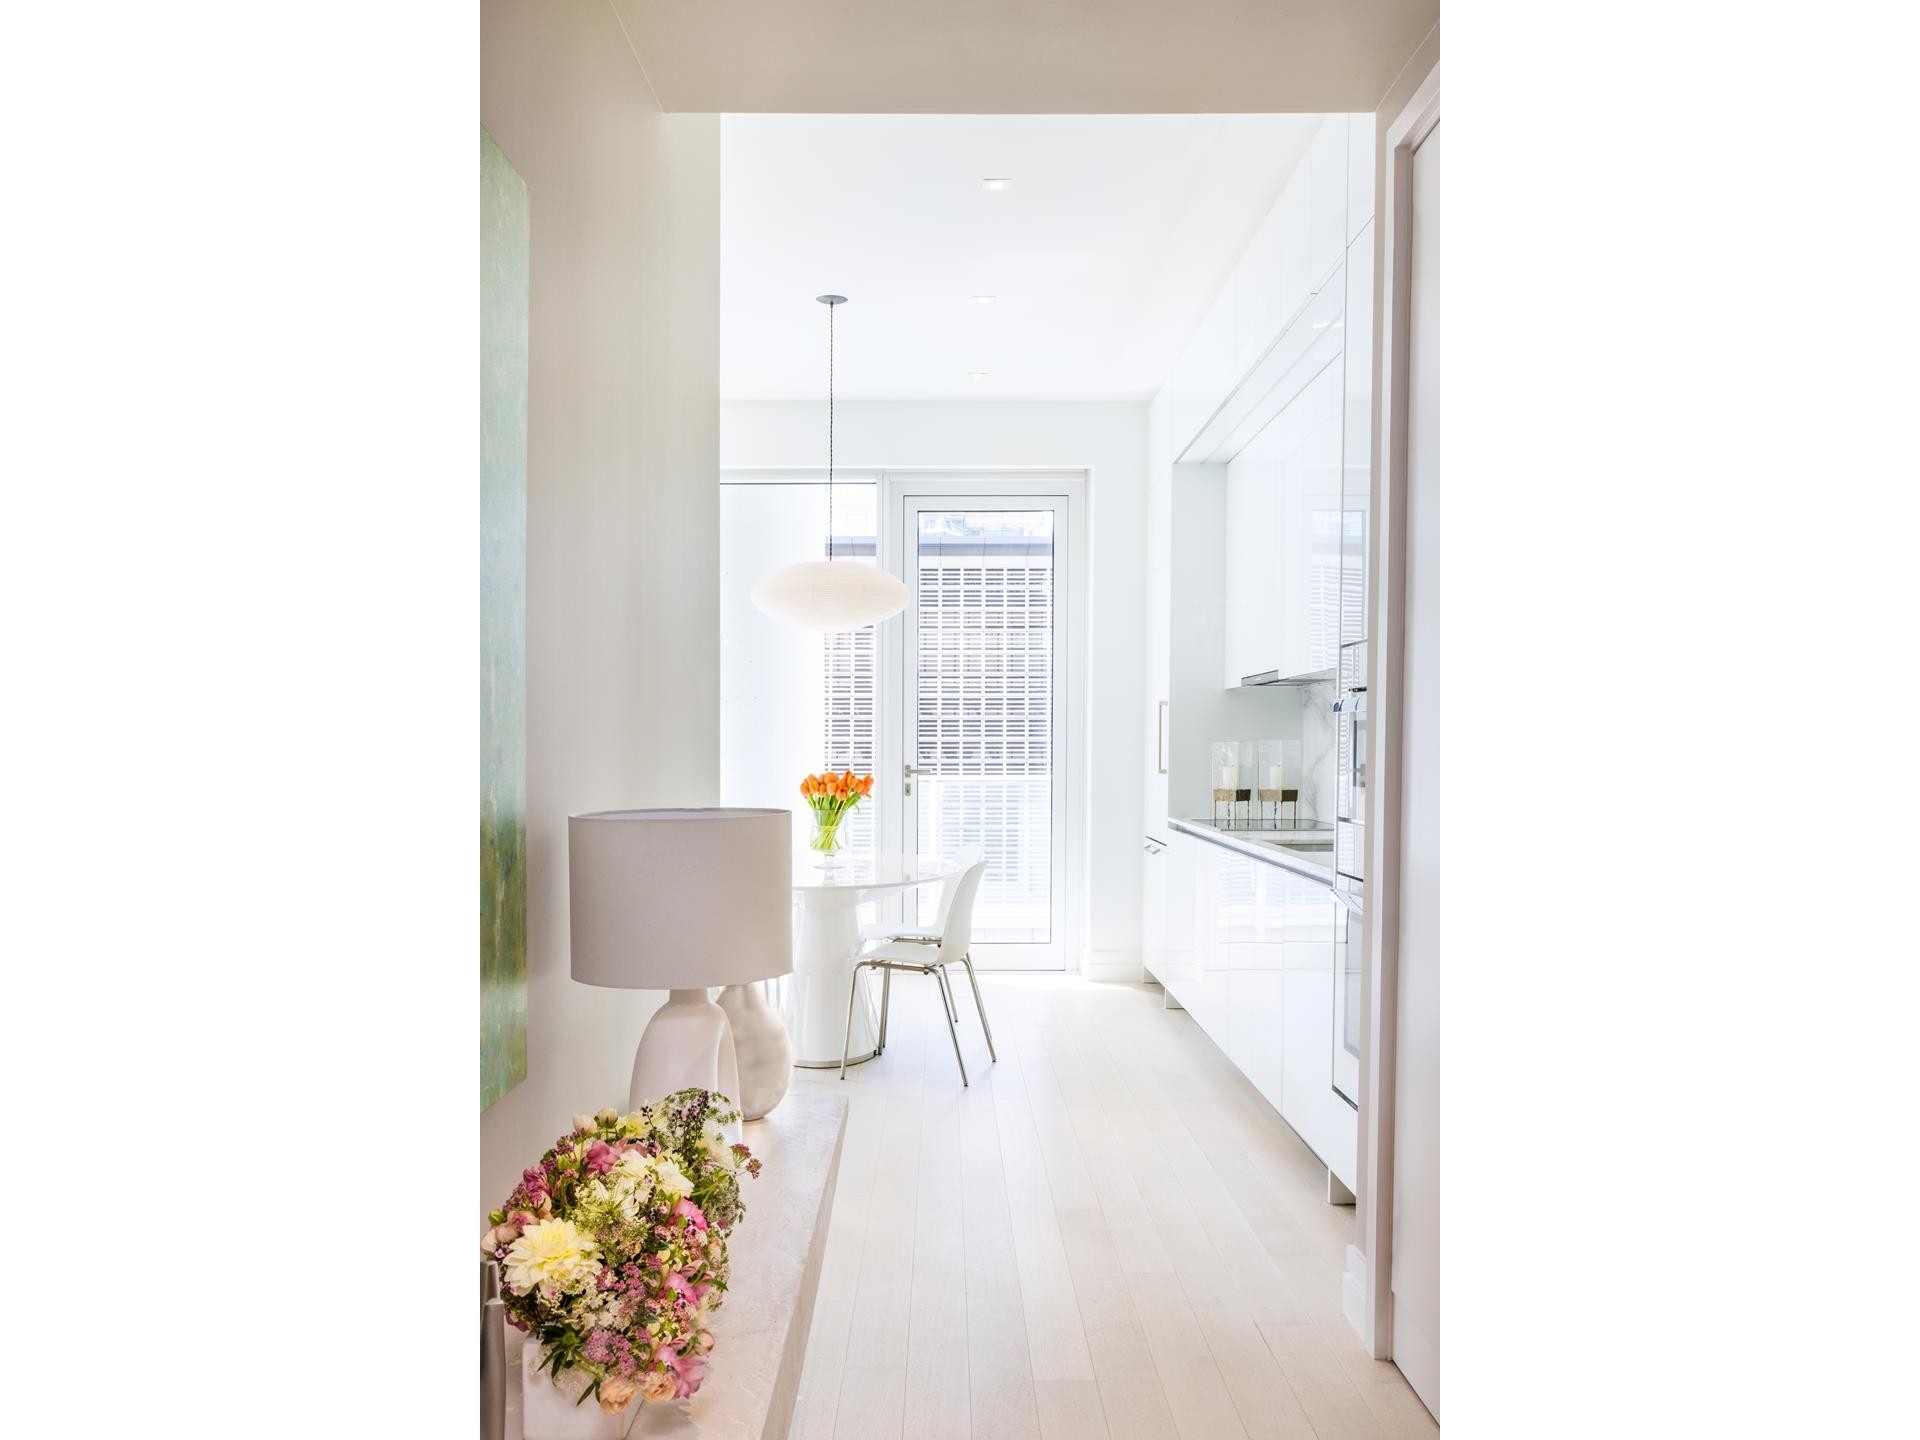 Condominium for Sale at 200 E 59TH ST, 10B Midtown East, New York, NY 10022